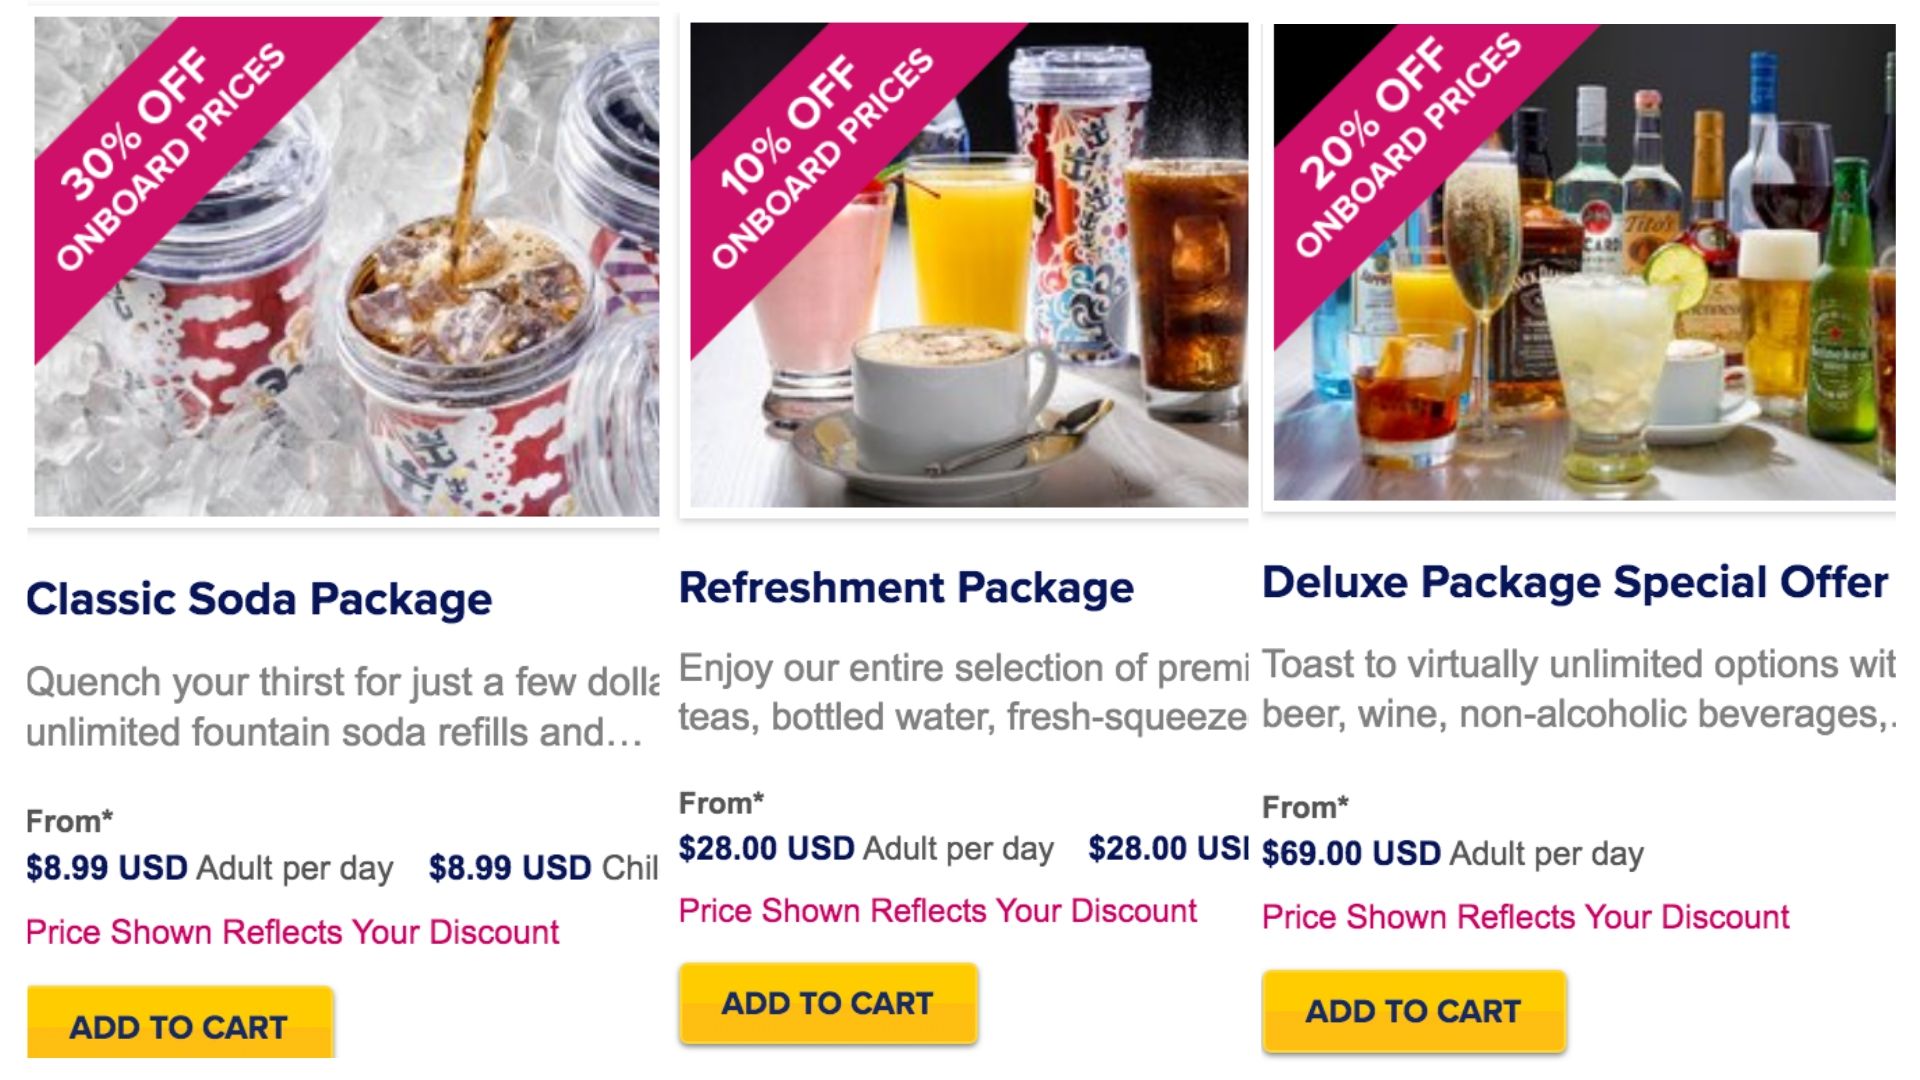 Royal Caribbean Cruise Line Beverage Packages Explained Me and the